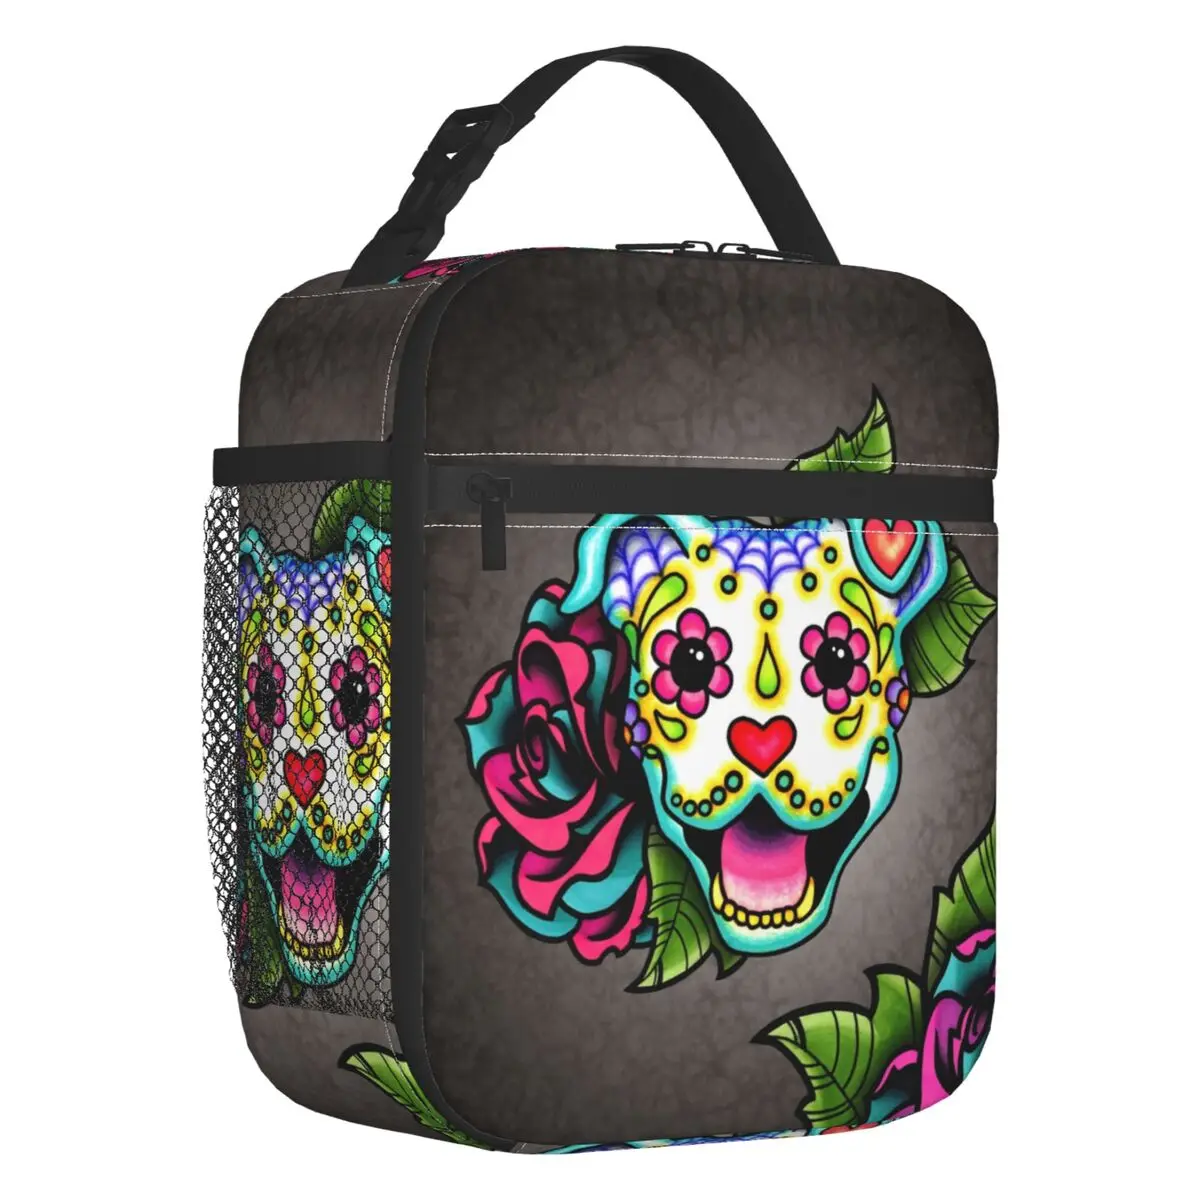 Smiling Pit Bull In White Insulated Lunch Tote Bag Day of the Dead Pitbull Skull Dog Terrier Portable Thermal Cooler Bento Box